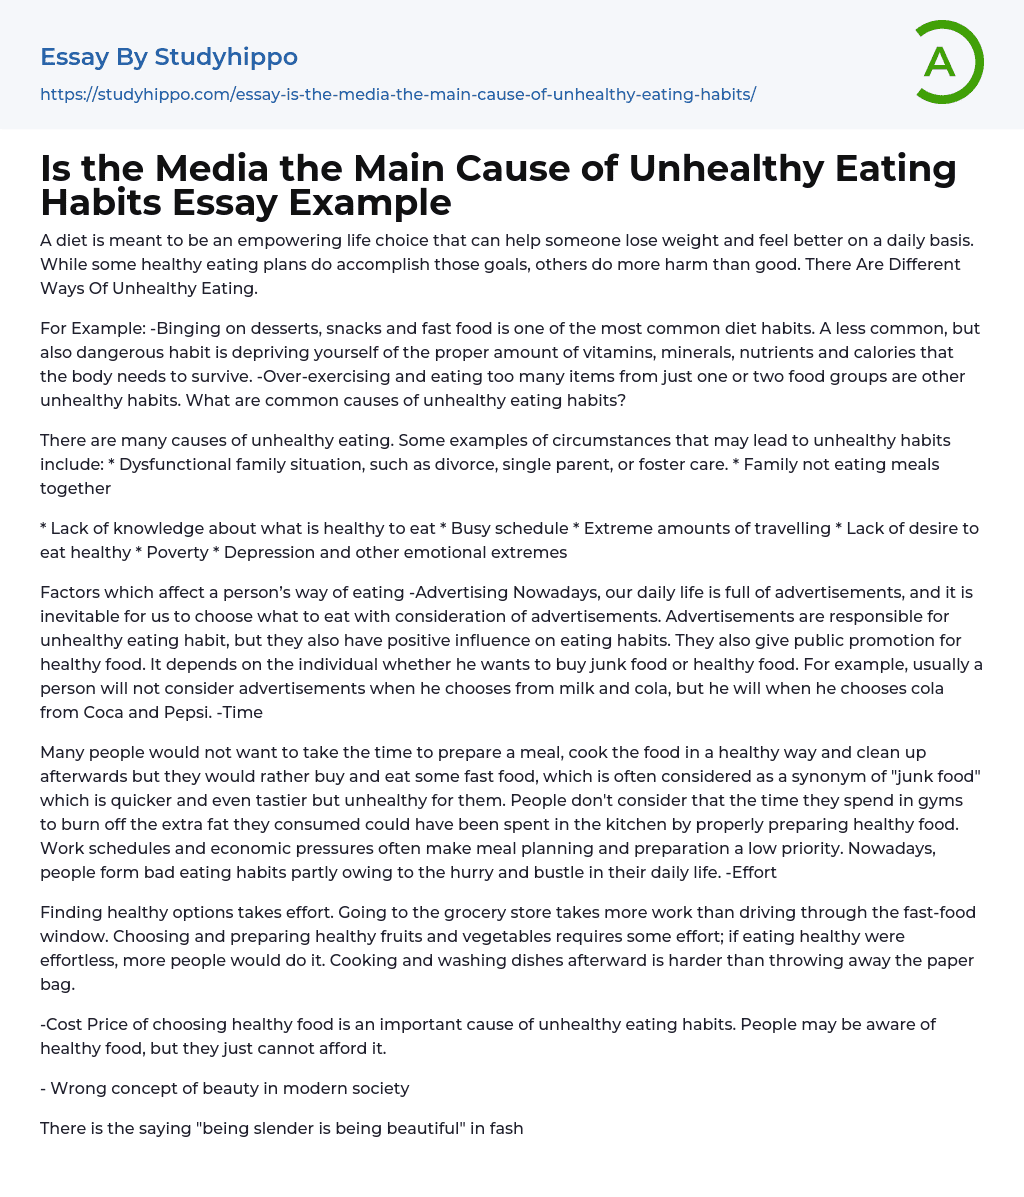 Is the Media the Main Cause of Unhealthy Eating Habits Essay Example